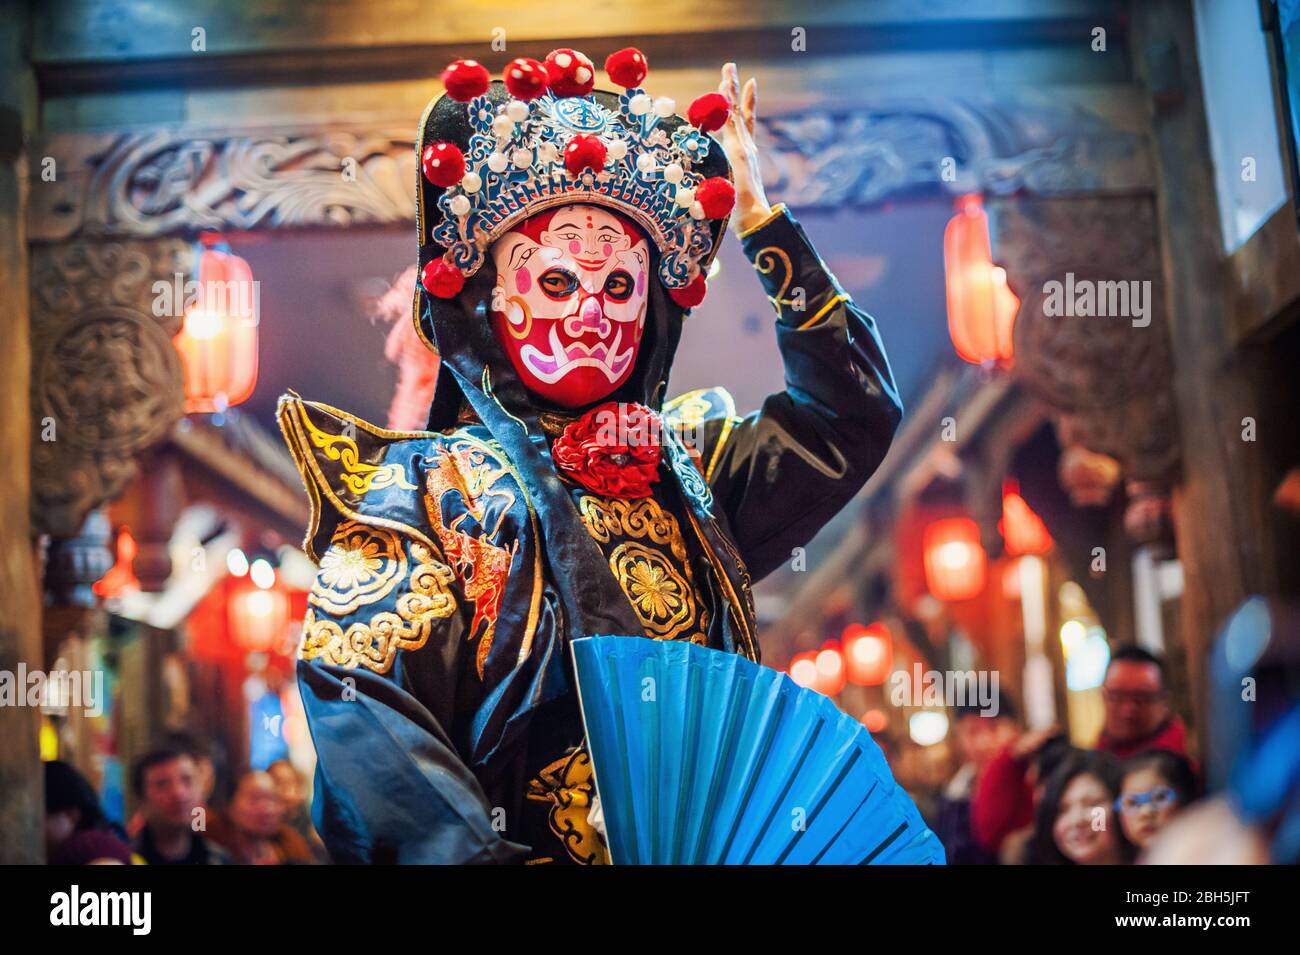 Chengdu, Sichuan Province, China - Jan 29, 2015: Chinese actor performs a public traditional face-changing art or bianlian onstage at Chunxifang Chunxilu covered street. Stock Photo